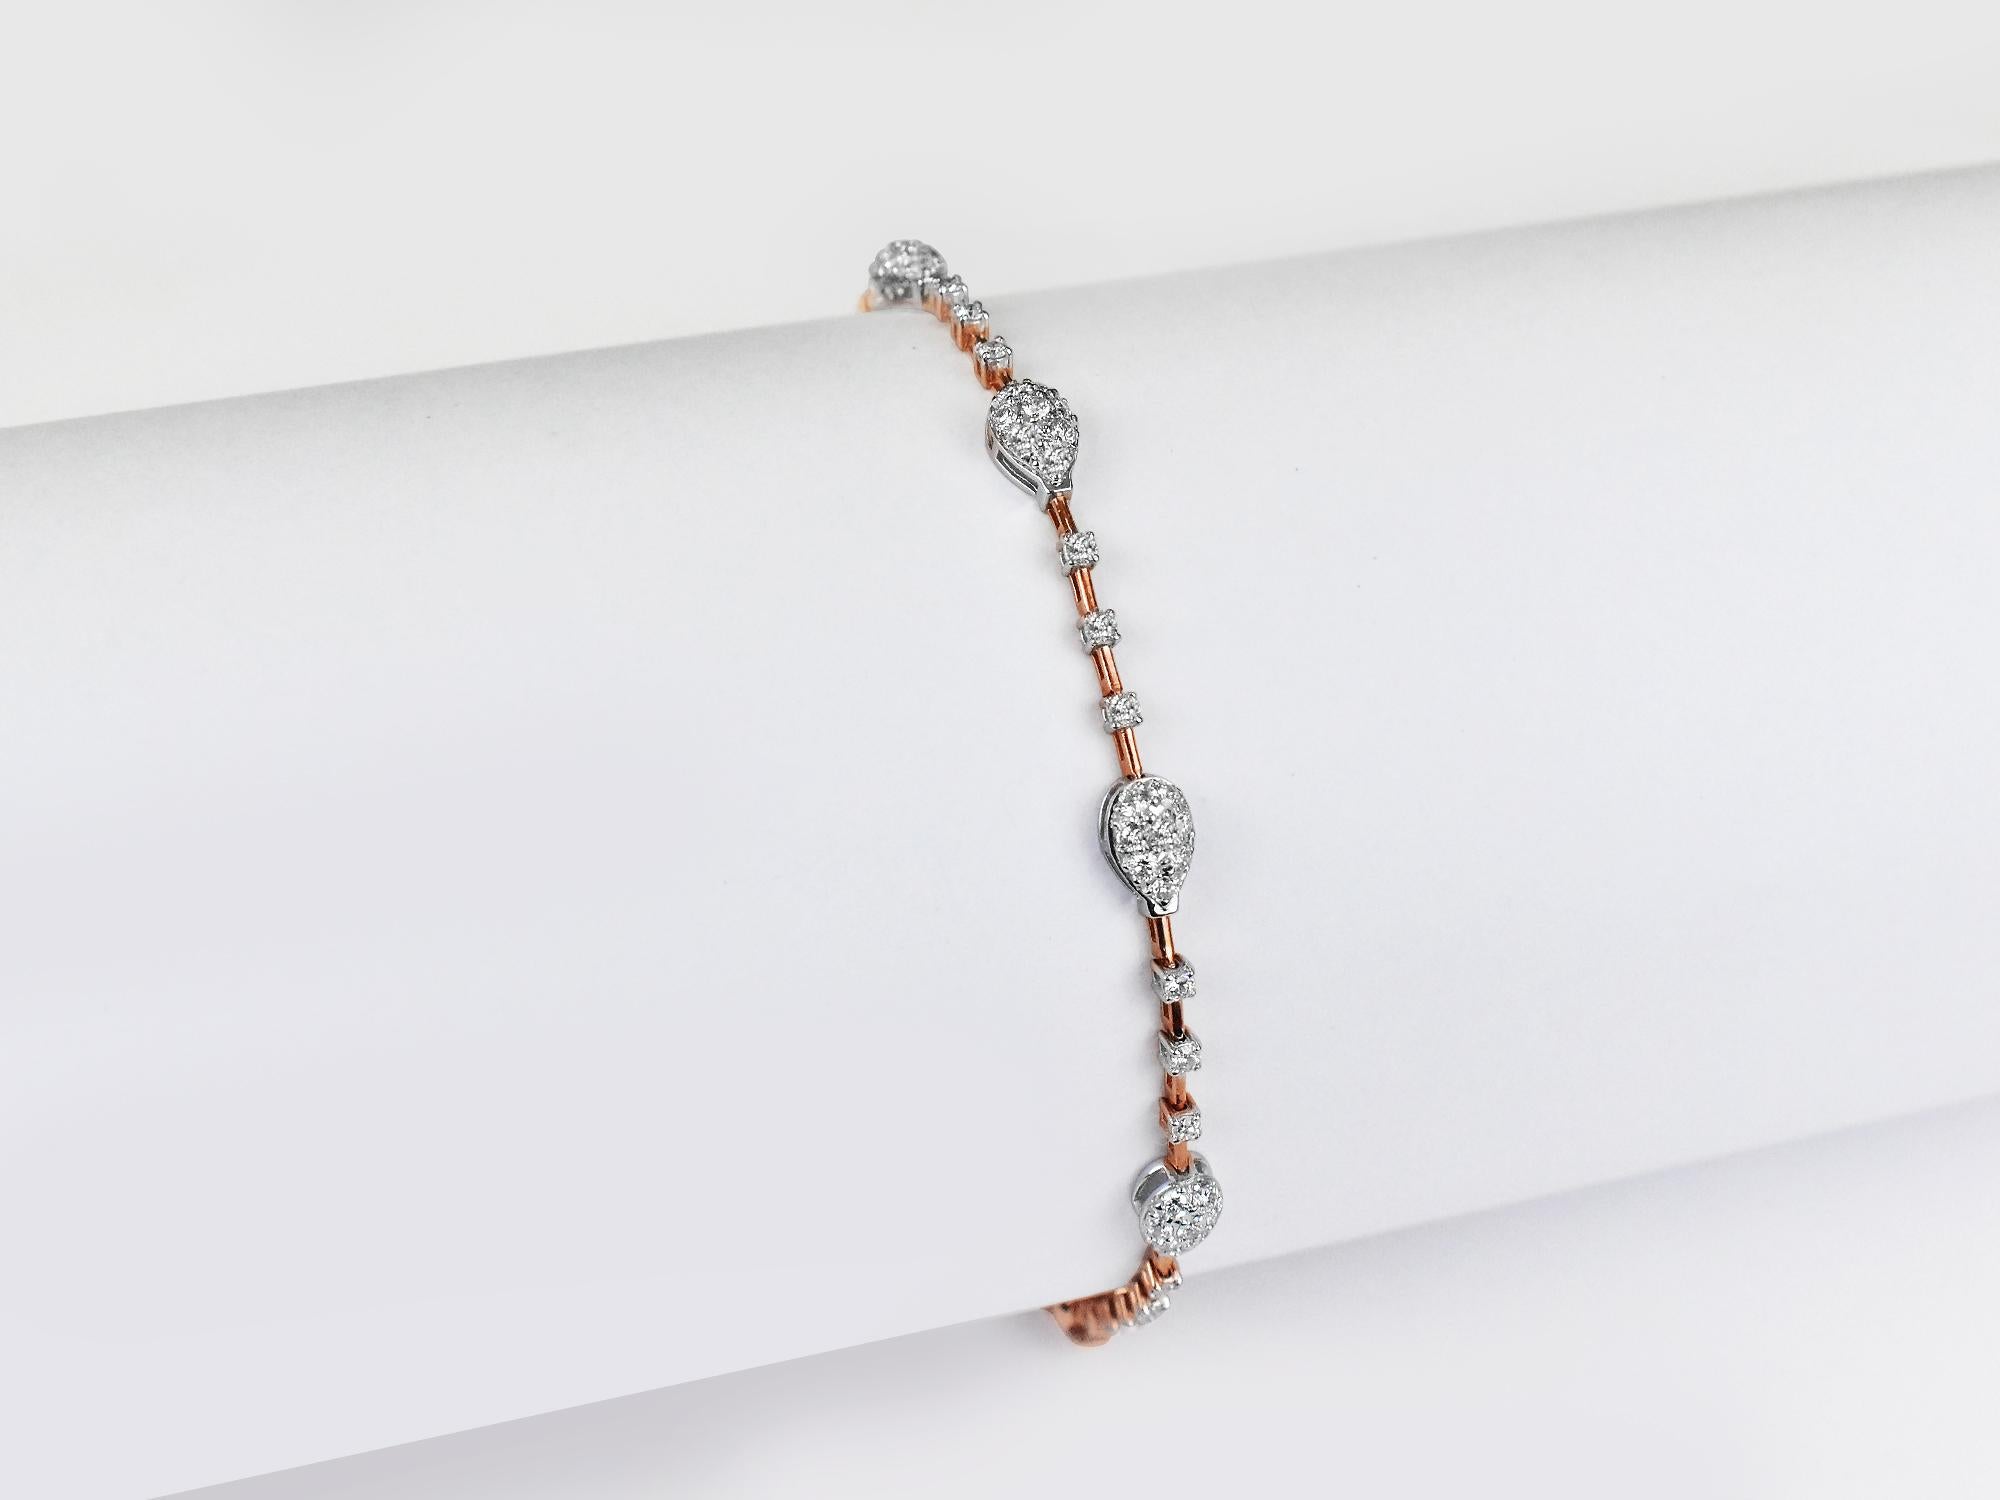 Diamond Station Bracelet, Diamond Cluster Bracelets, Diamond Pear Pave Cluster Bracelets, Delicate Bridal Gift

This Lovely and Delicate gold bracelet is made with 18k solid rose gold featured with 1.4 ct round cut genuine diamonds with color G and